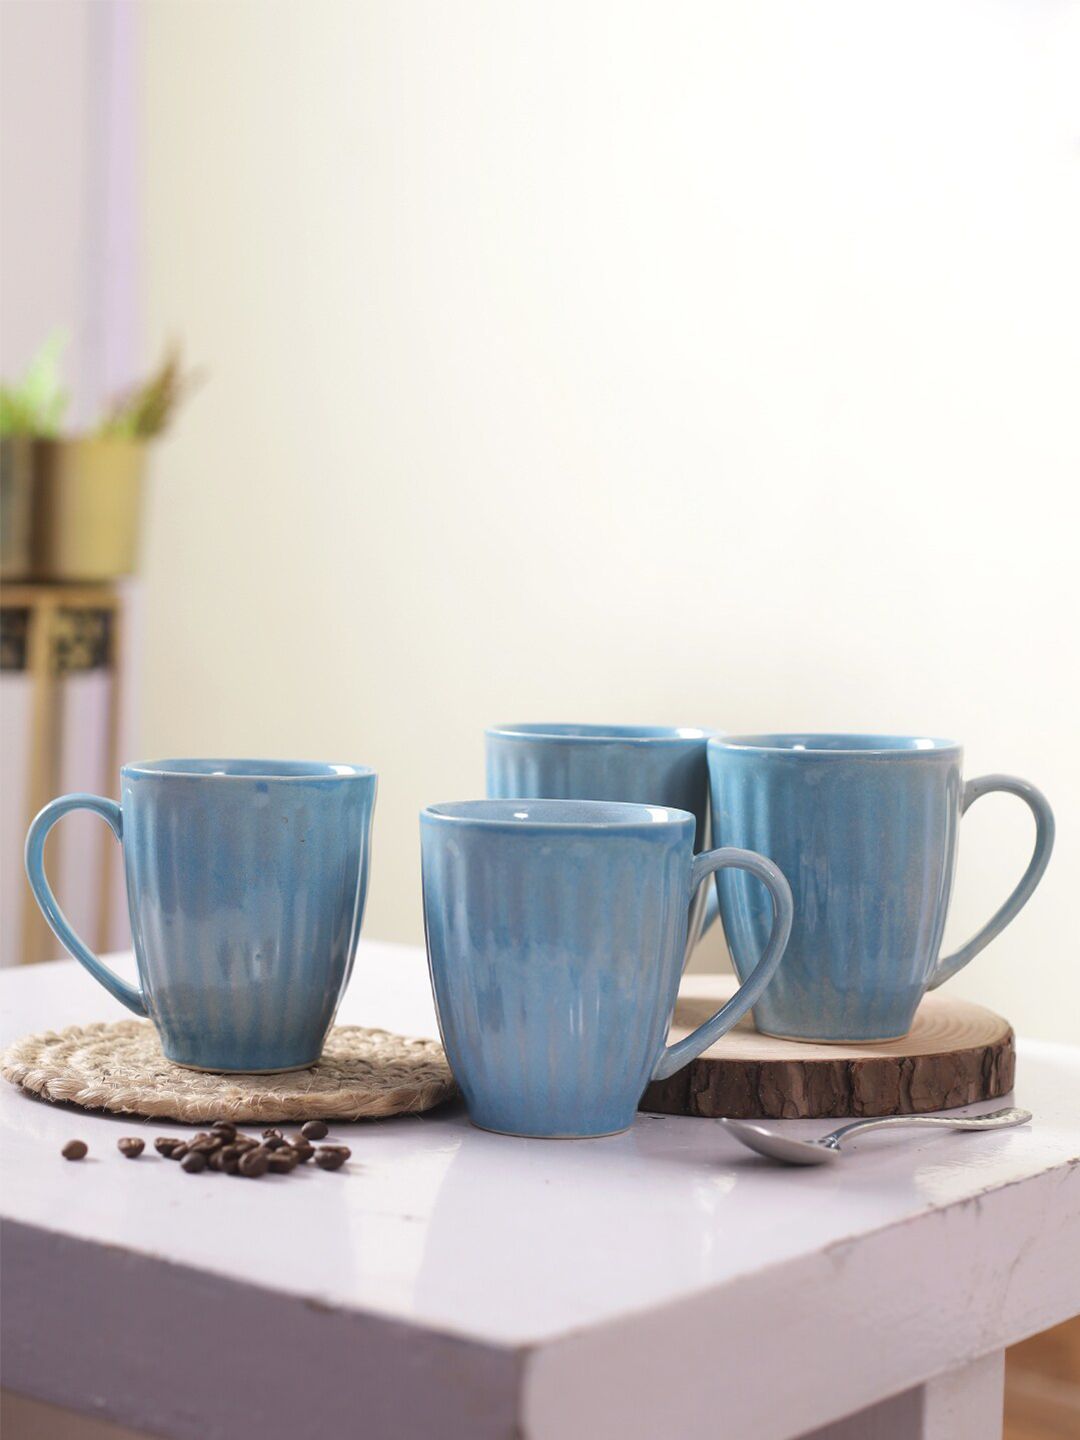 Aapno Rajasthan Blue Solid Ceramic Glossy Mugs Set of Cups and Mugs Price in India